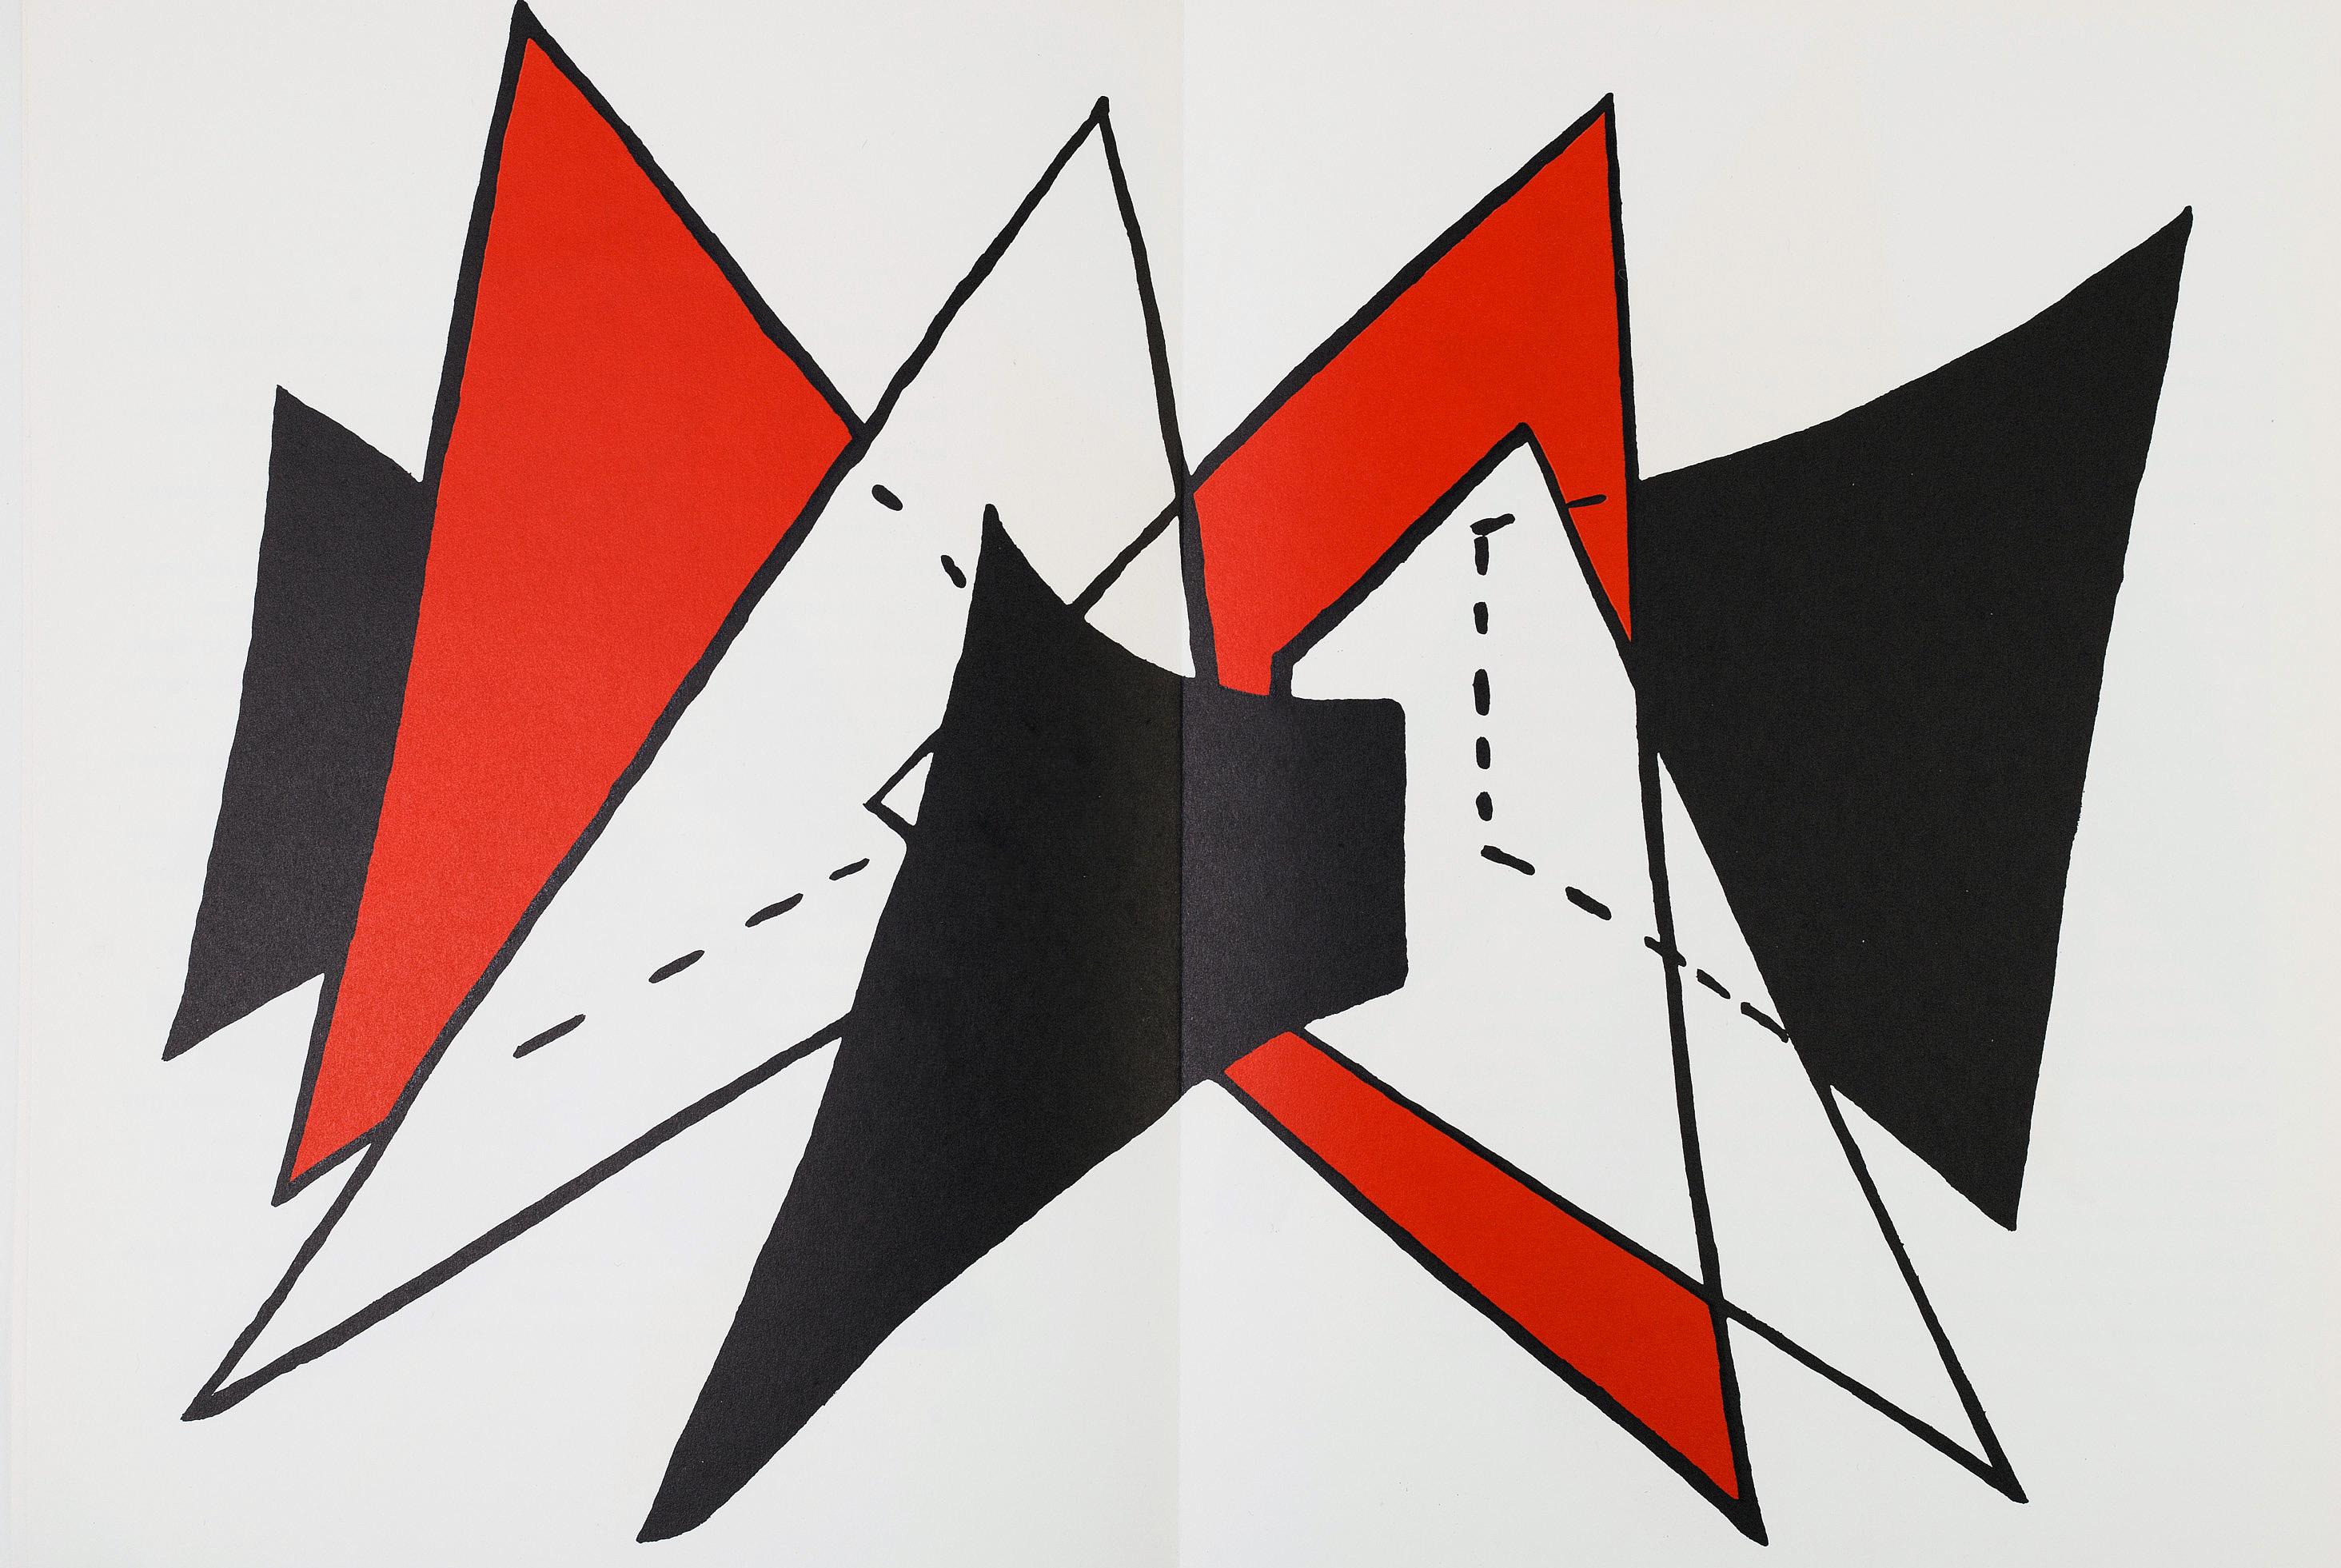 What is so revolutionary about Alexander Calder's mobiles?